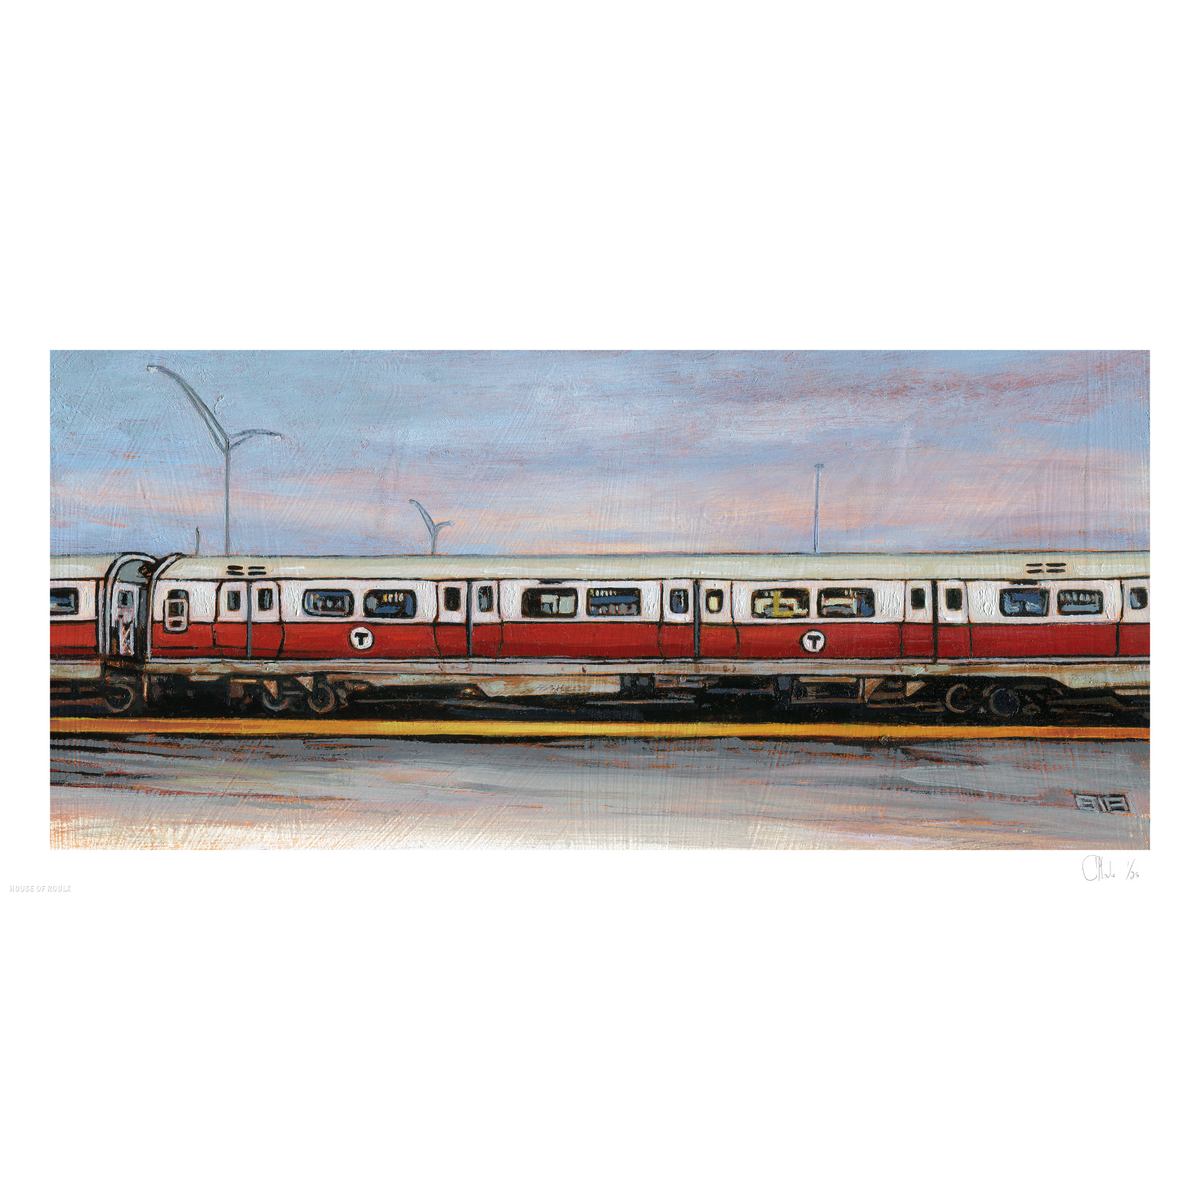 Andrew Houle &quot;The Red Line&quot; - Archival Print, Limited Edition of 25 - 12 x 24&quot;